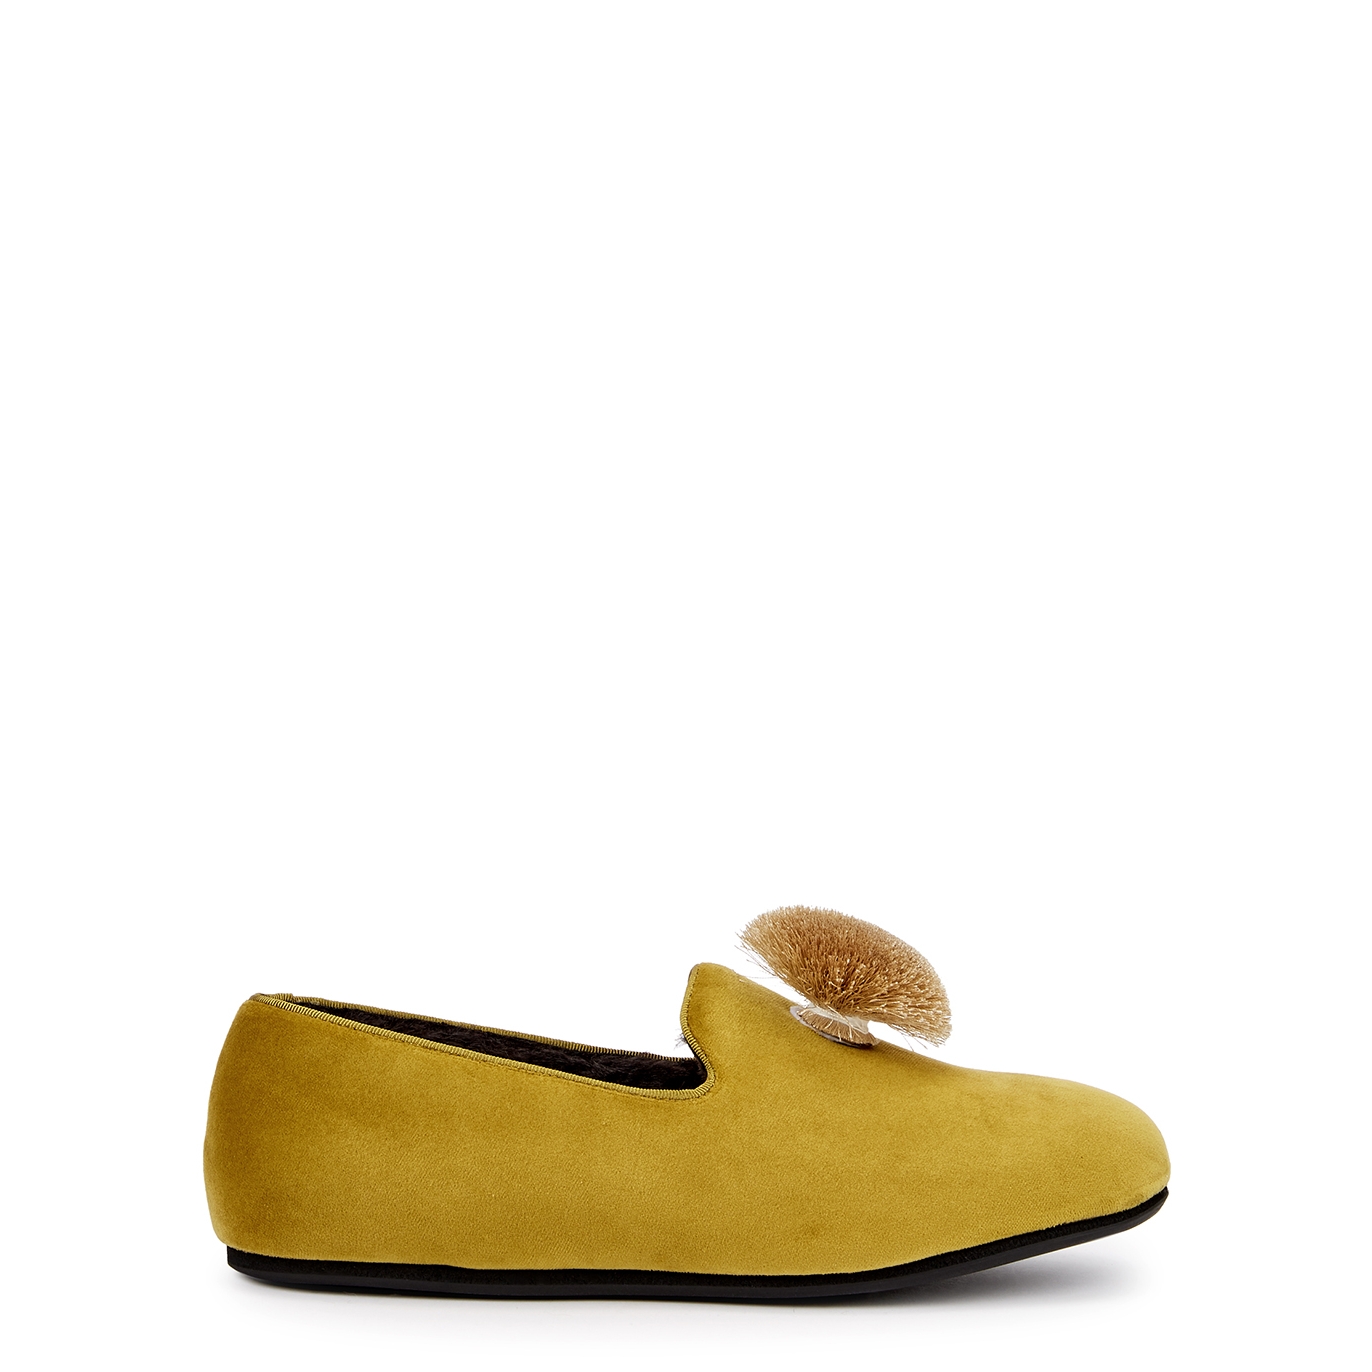 Hums Lioin Yellow Pompom Velvet Loafers - 5